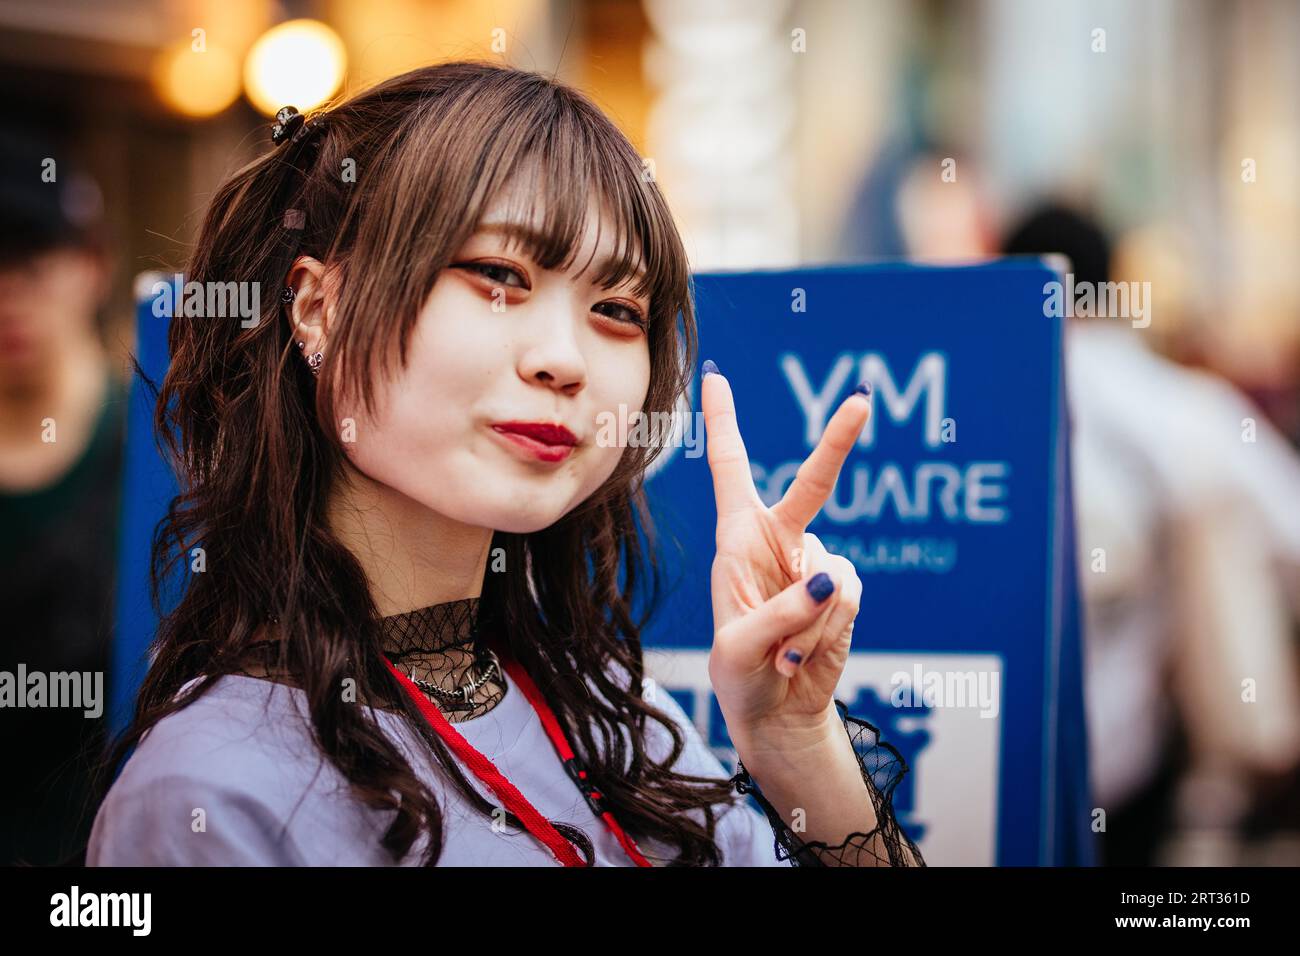 Tokyo, Giappone, 18 maggio 2019: Street Life Portraits of Amazing fashion and culture, a Harajuku, Tokyo, Giappone Foto Stock